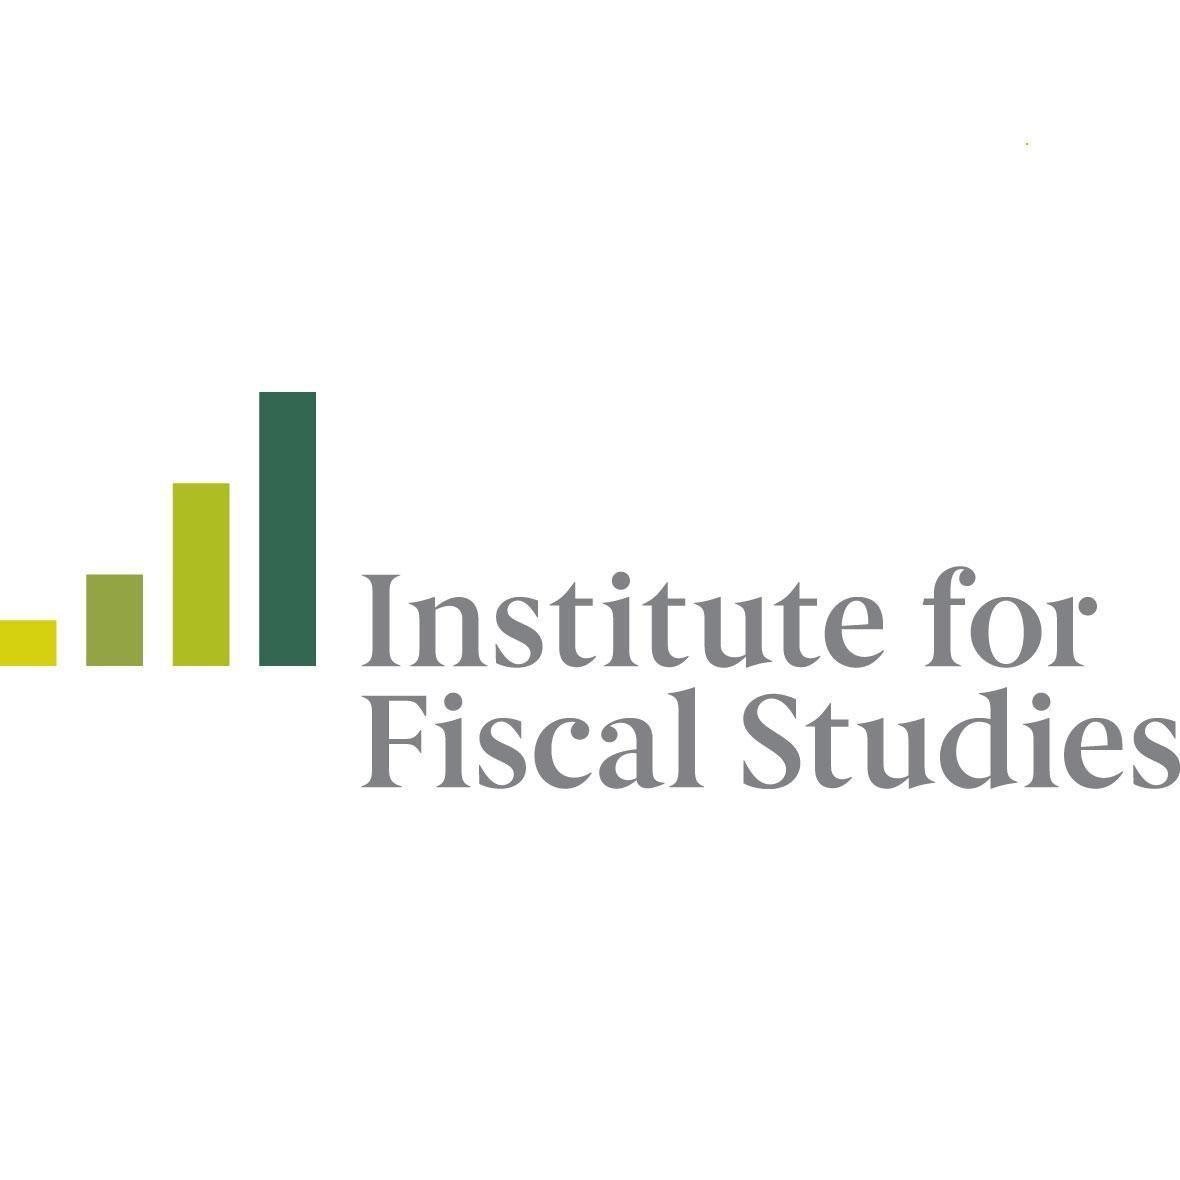 IFS Logo - Institute For Fiscal Studies - IFS